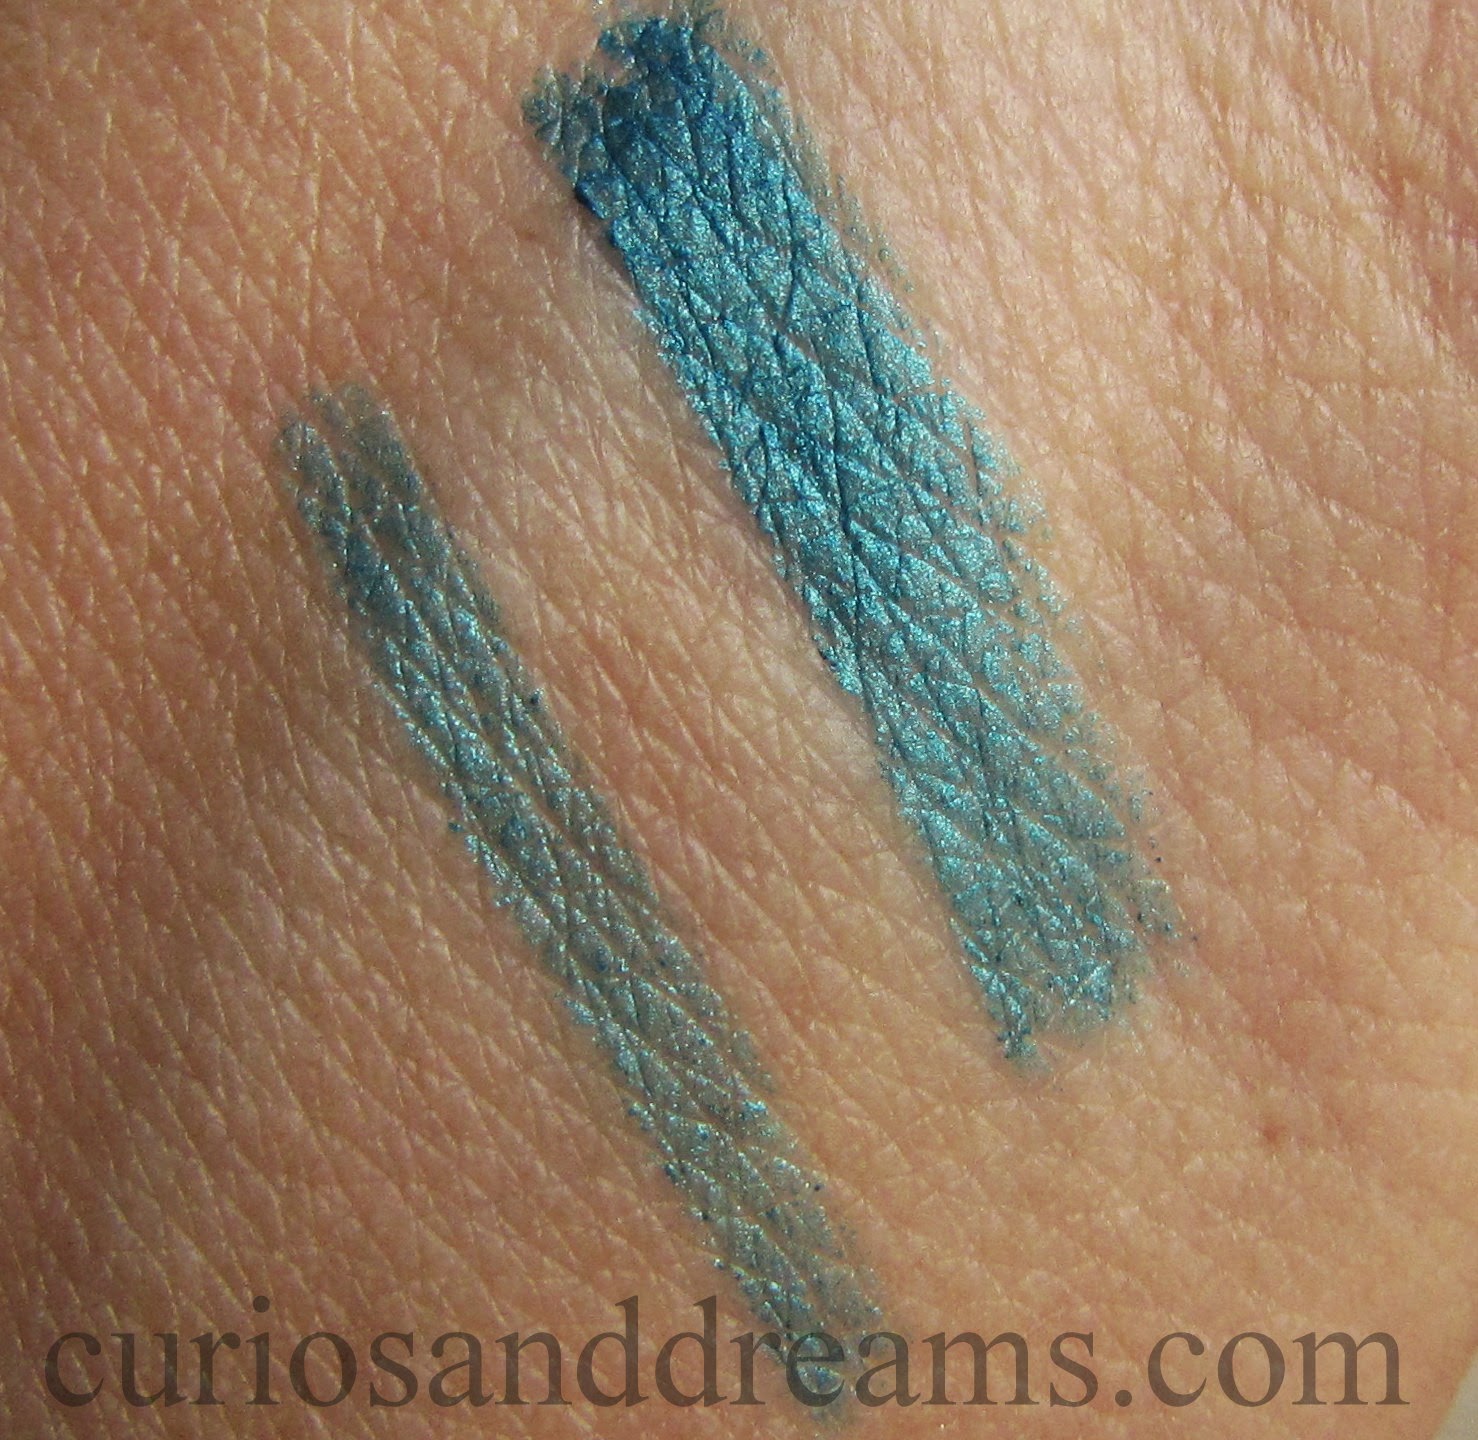 Maybelline the Colossal Kohl Turquoise Review, Maybelline the Colossal Kohl Turquoise Swatches, Maybelline the Colossal Kohl Turquoise EOTD